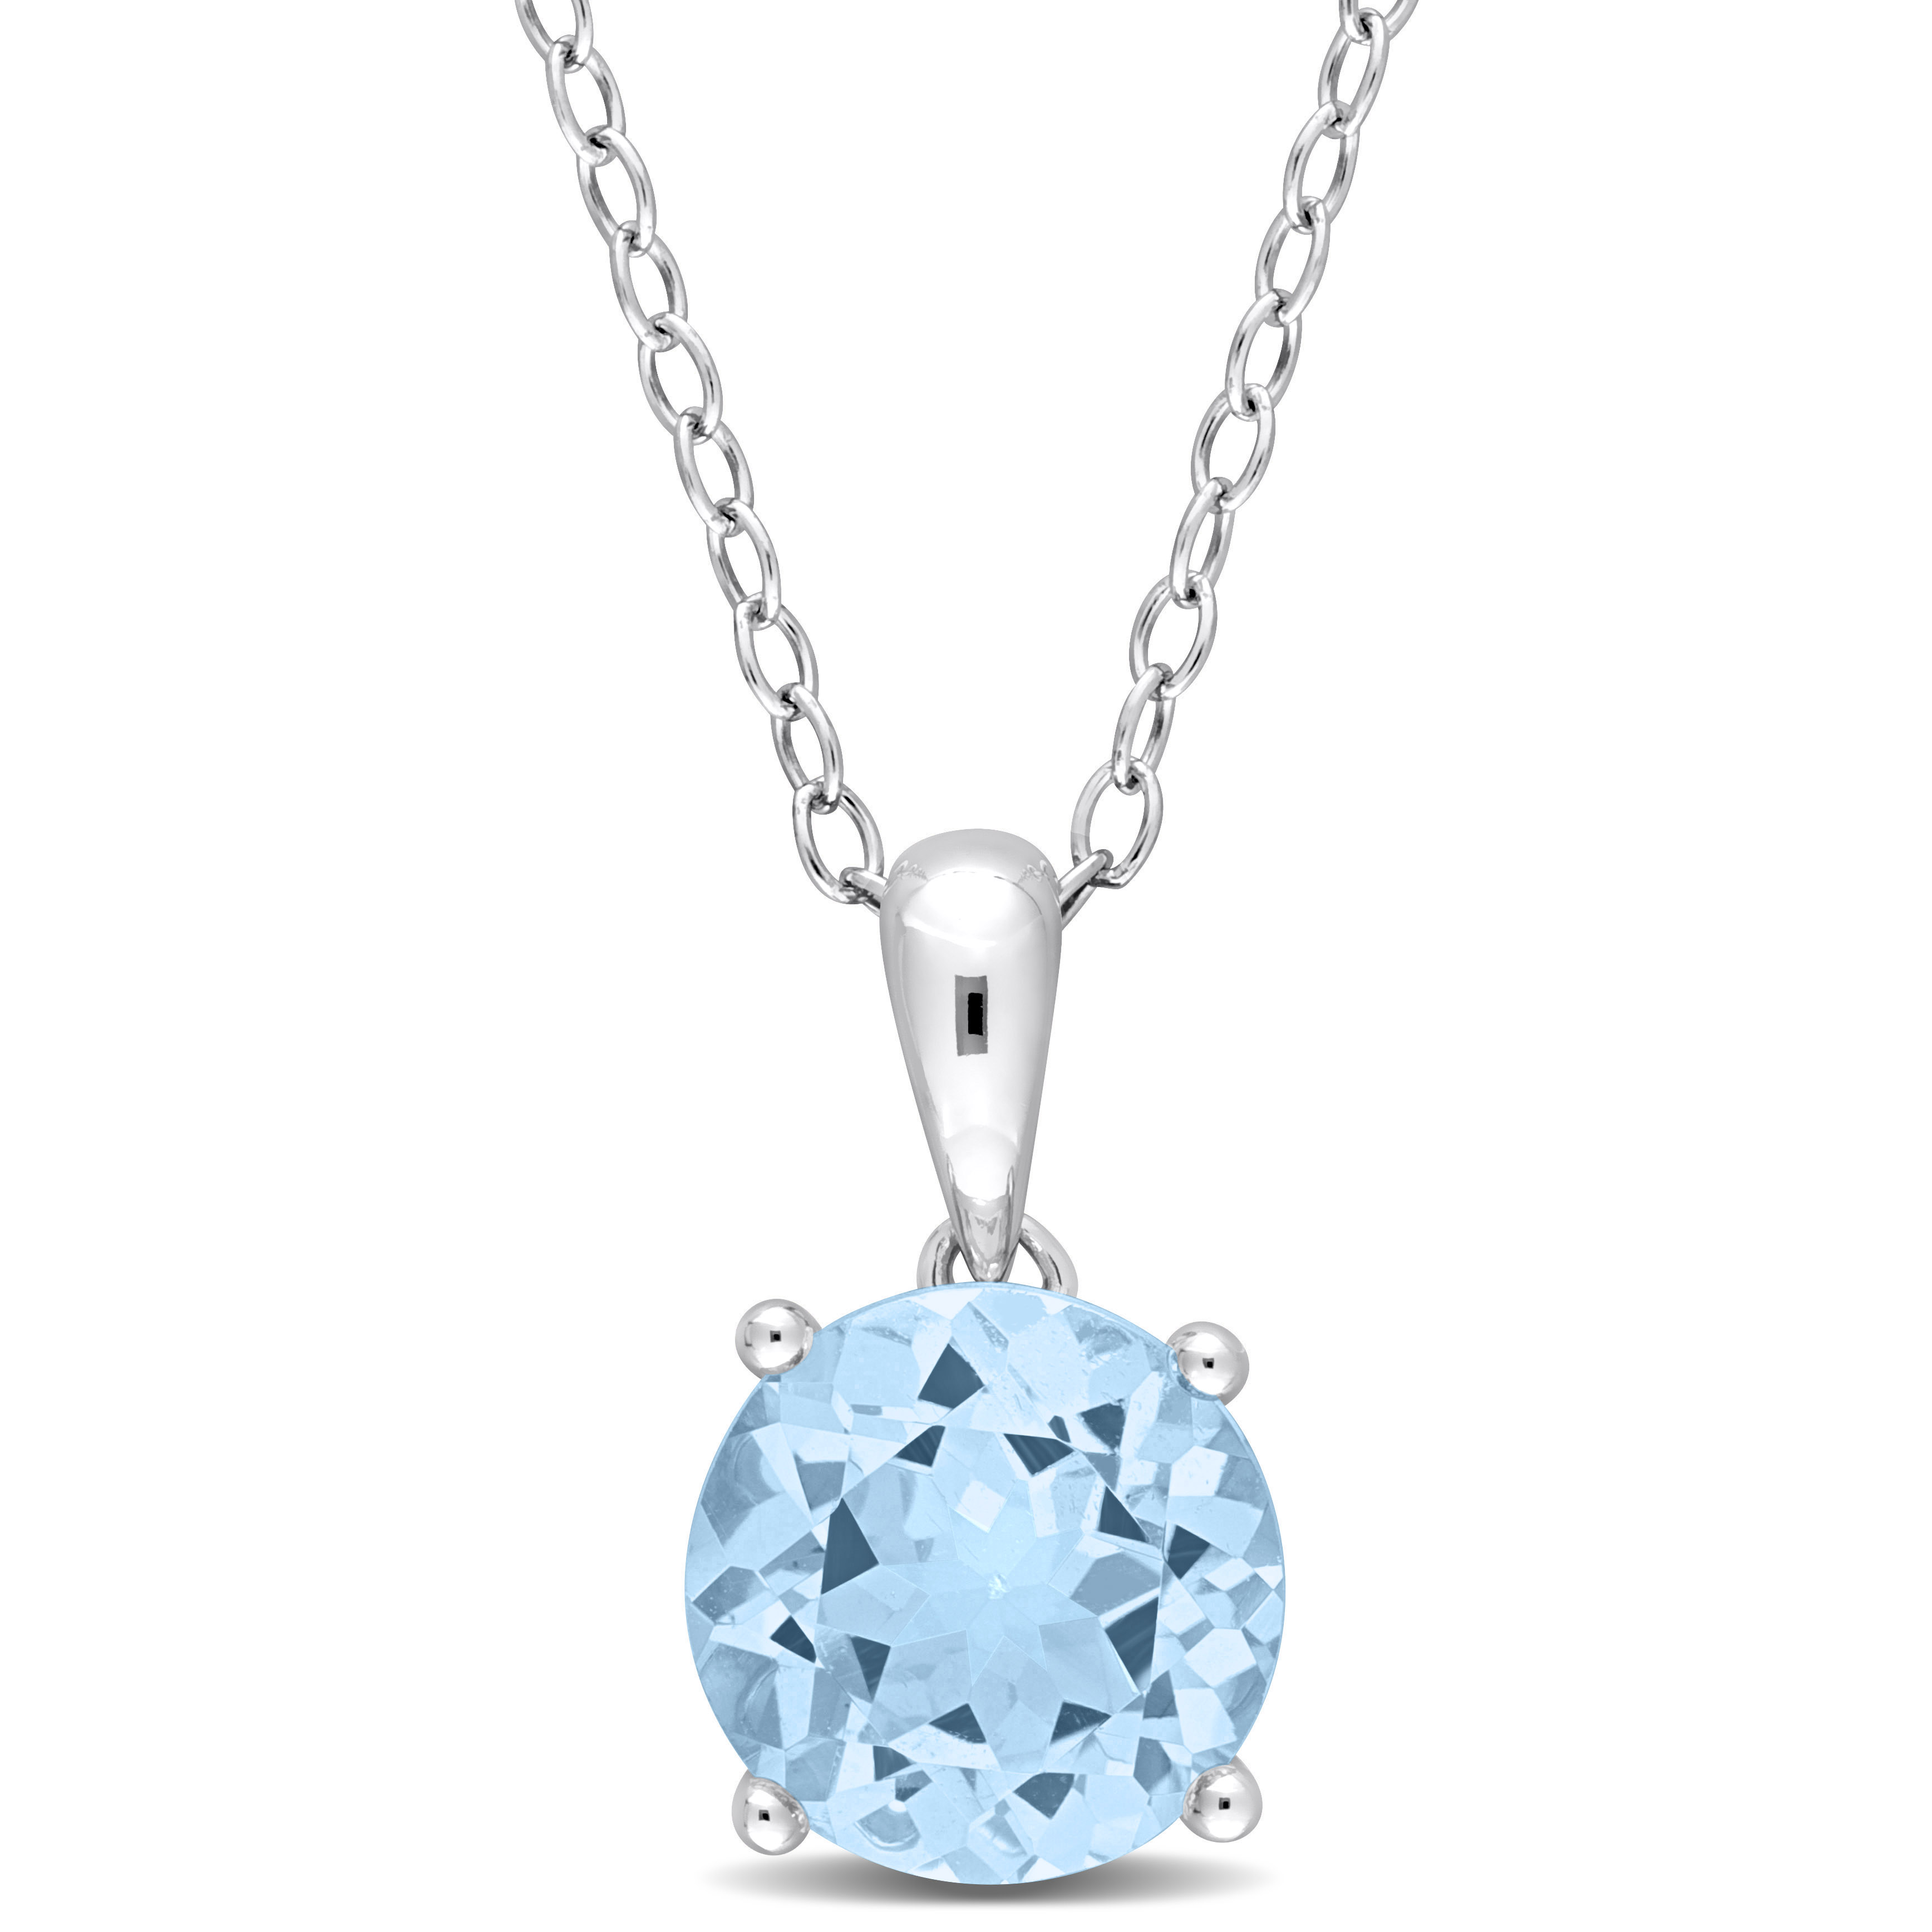 2 1/3 CT TGW Sky Blue Topaz Solitaire Heart Design Pendant with Chain in Sterling Silver - 18 in.